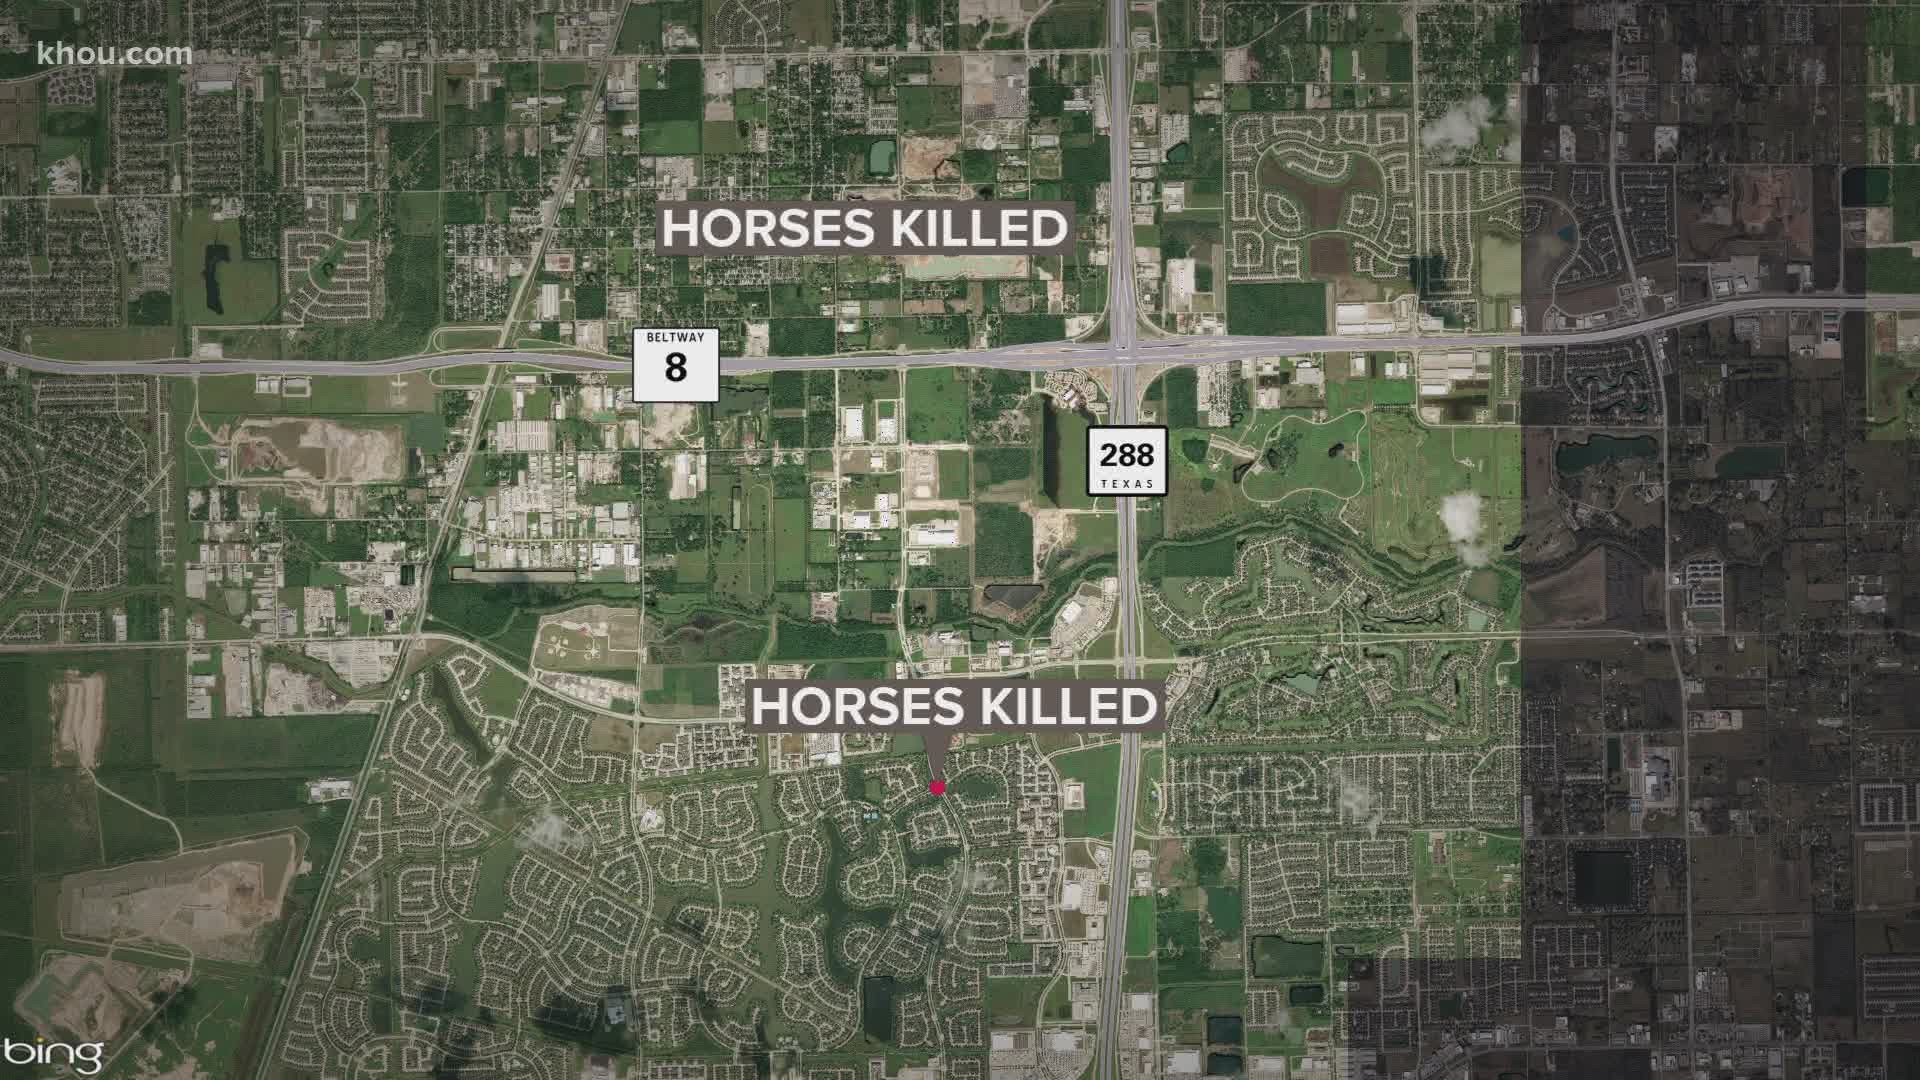 Pearland police are asking horse owners to be on the lookout after five horses were found slaughtered in the area since May.